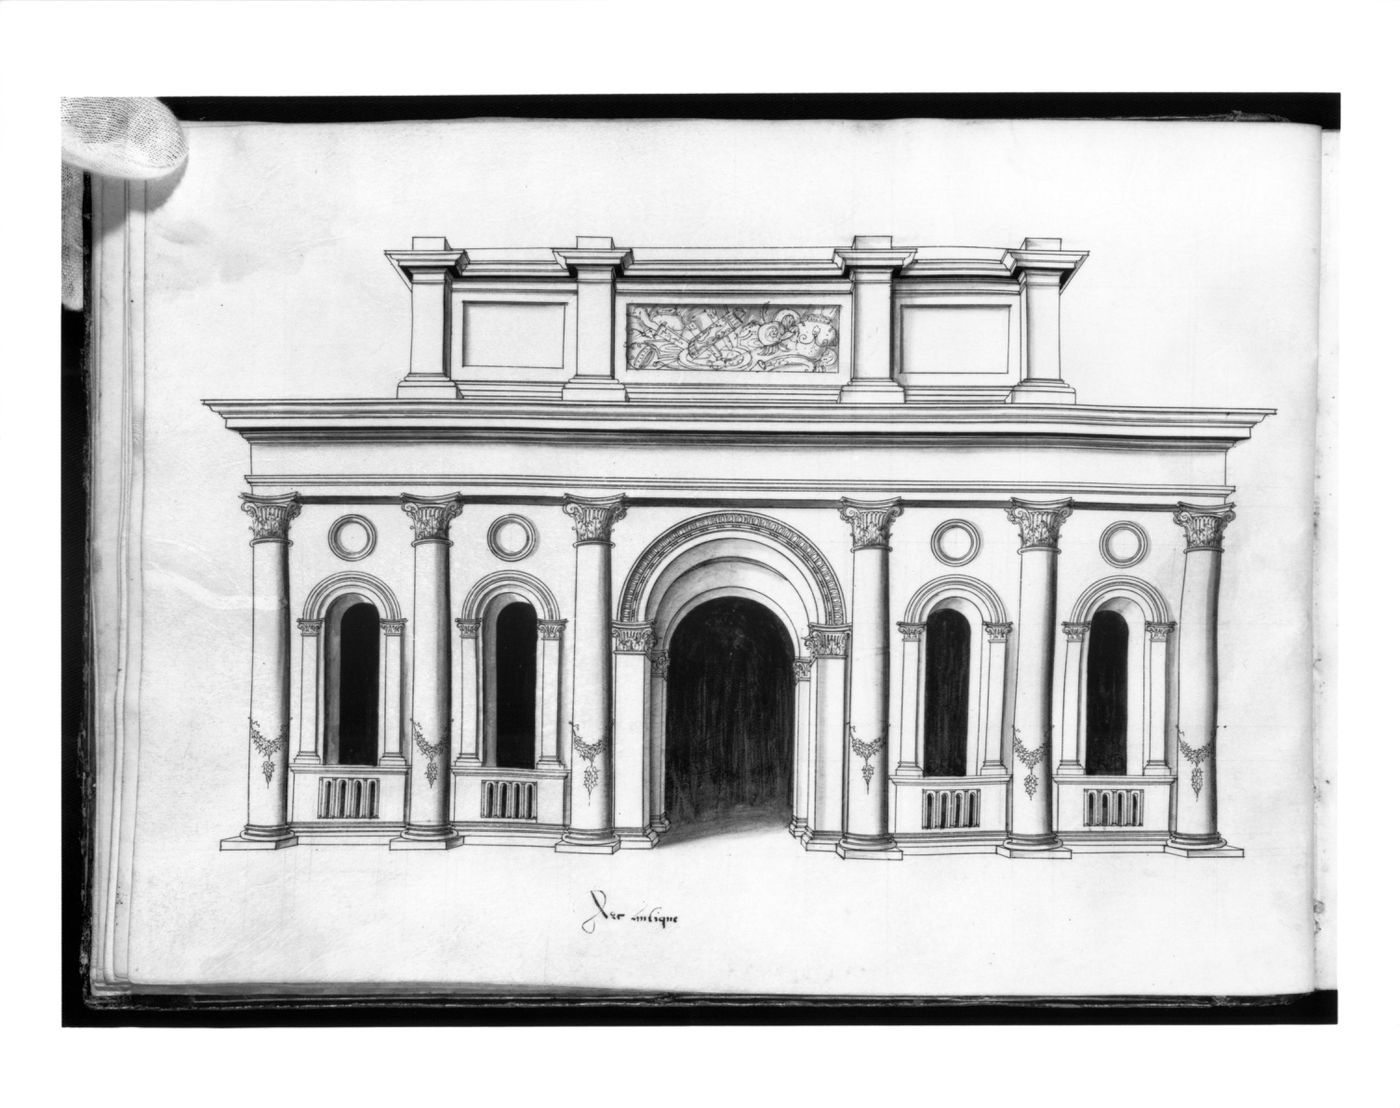 Design for a structure with a central arch in the antique manner